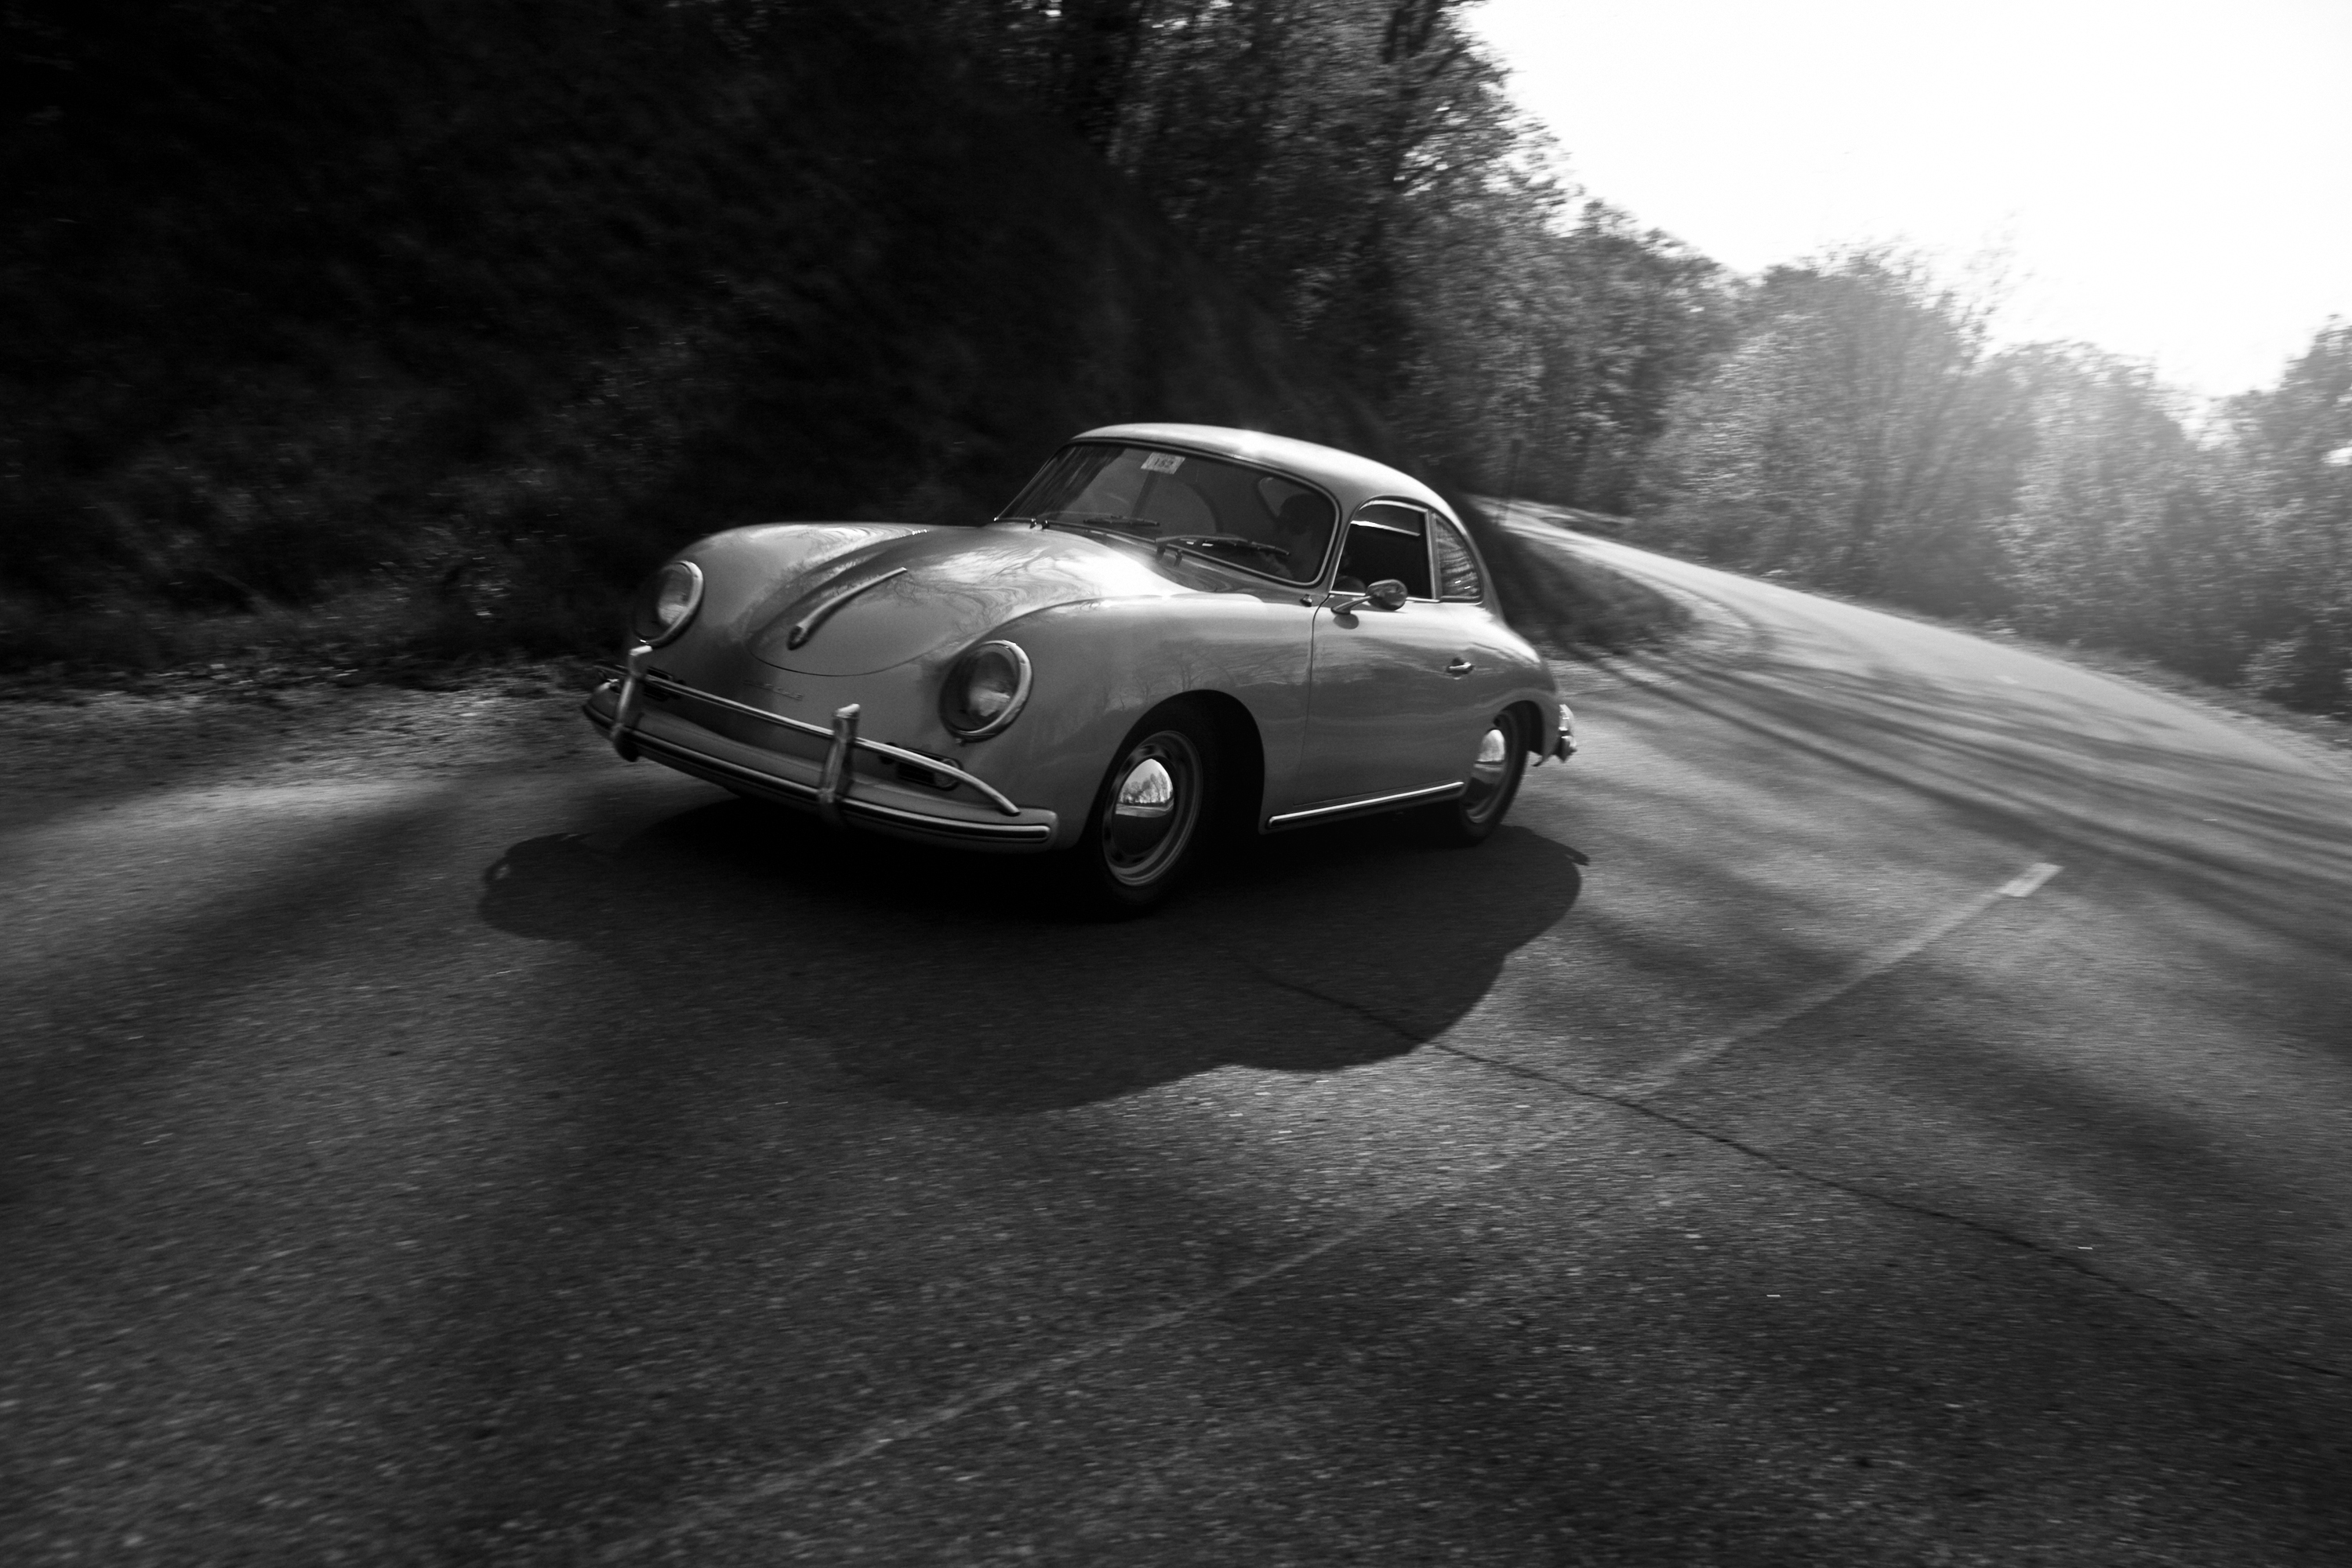 Free photo Vintage car in black and white photo